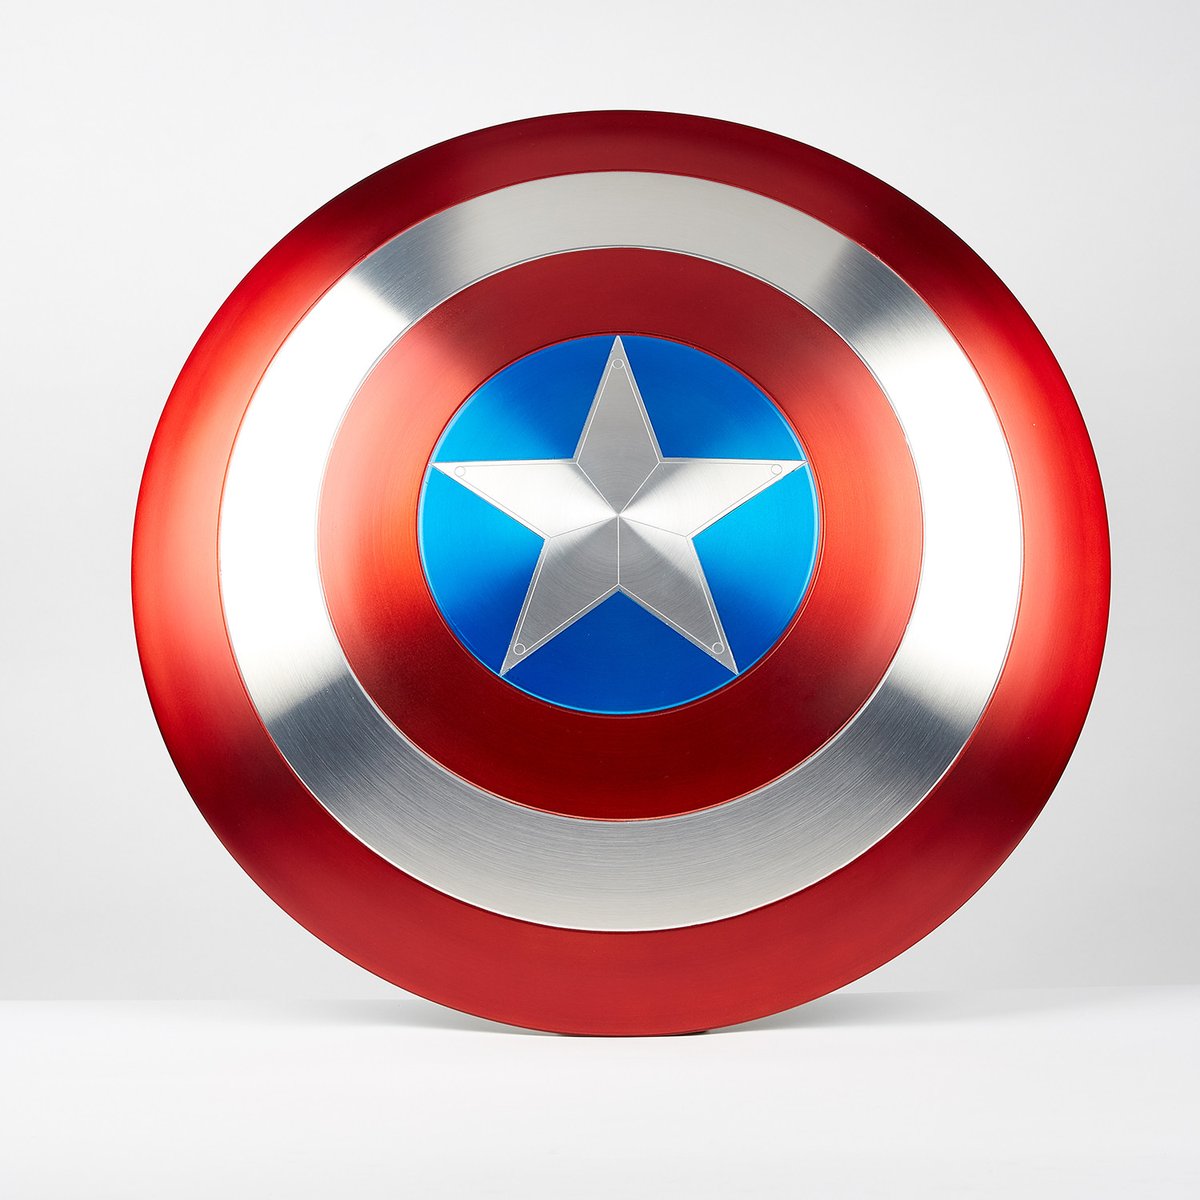 #ISTE20 Thank you everyone who entered our #CaptainAmerica Shield raffle and visited with us at our virtual booth.  The WINNER OF THE SHIELD IS Maria Dickerson of El Paso.  #remoteteaching #onlinelearning #conference #digitalsignage #arreyadigital